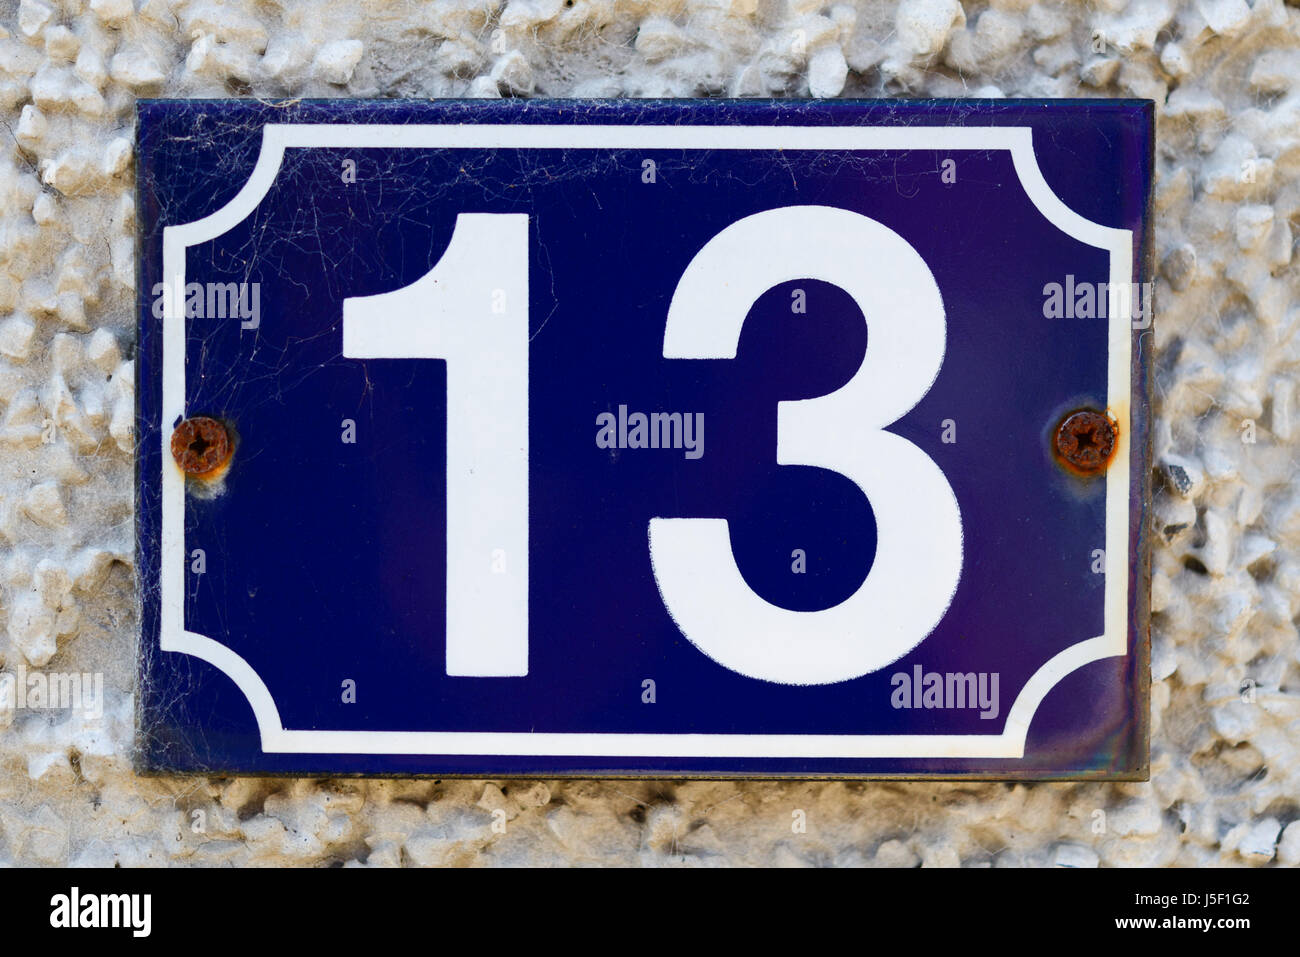 House number 13ca in white on a dark blue background, fastened to a pebble-dashed wall. Stock Photo